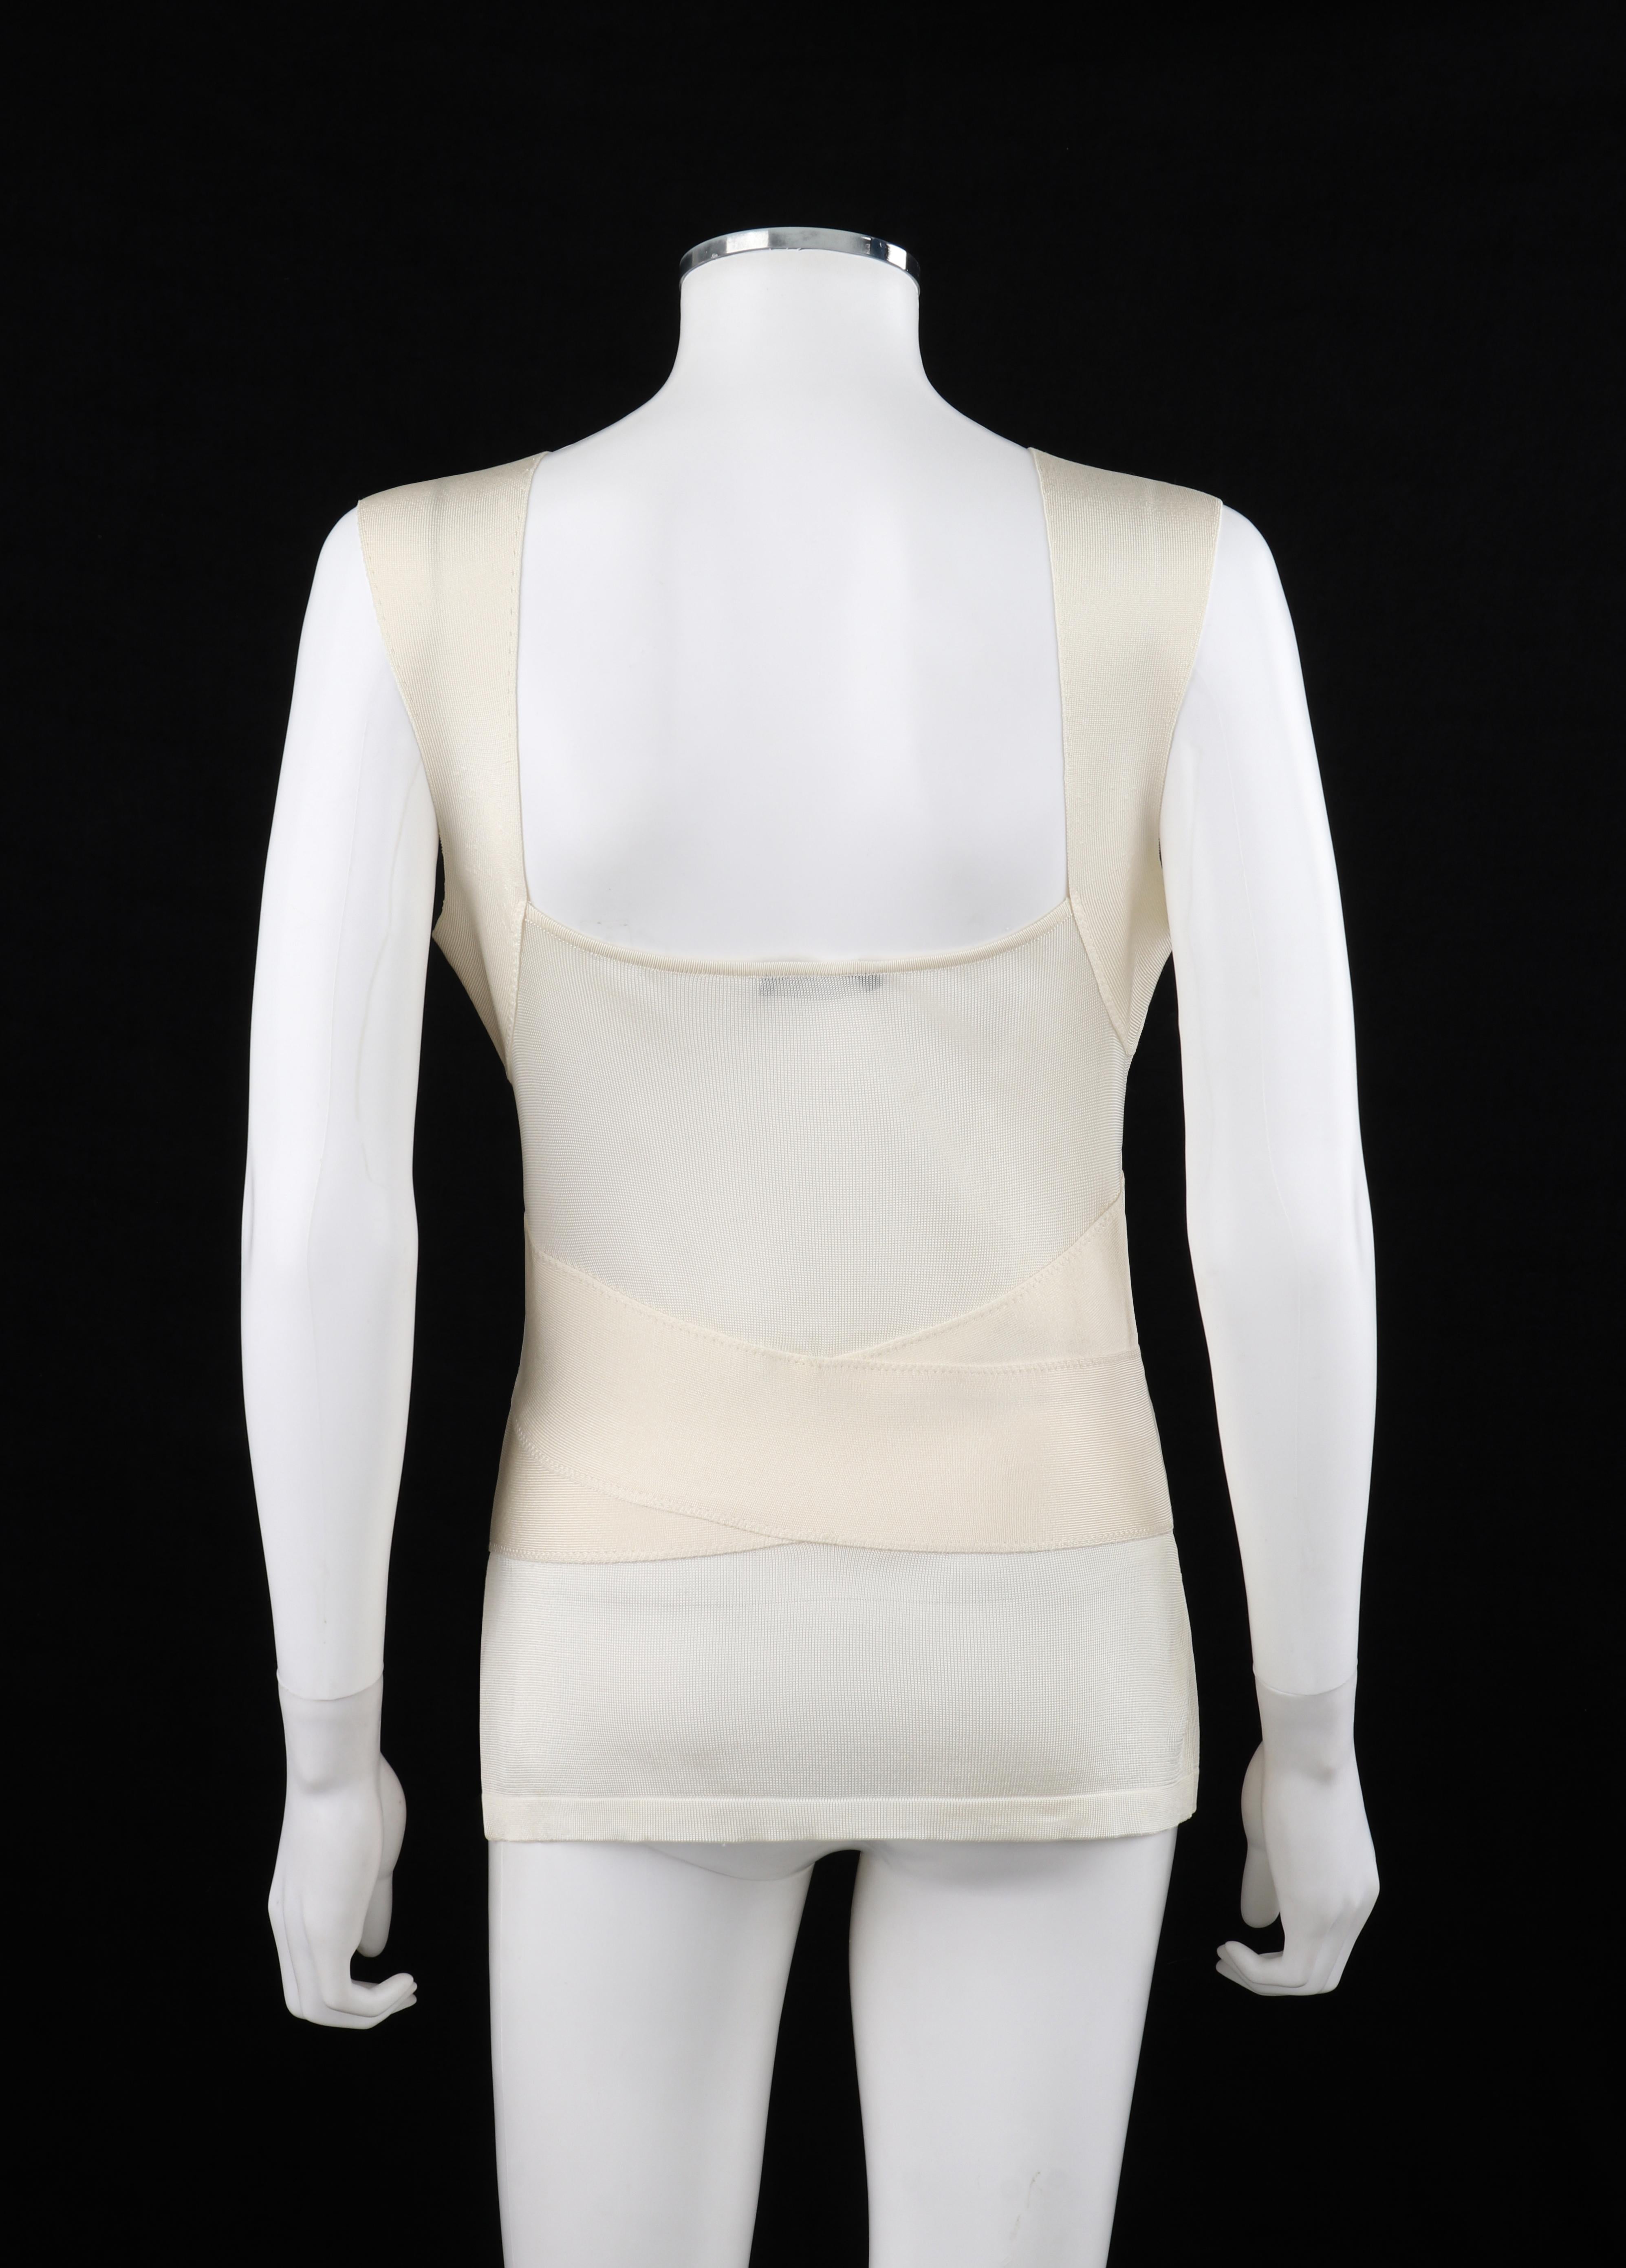 Women's ALEXANDER McQUEEN c.2007 Ivory Stretch Knit Semi-Sheer Sleeveless Bandage Top For Sale